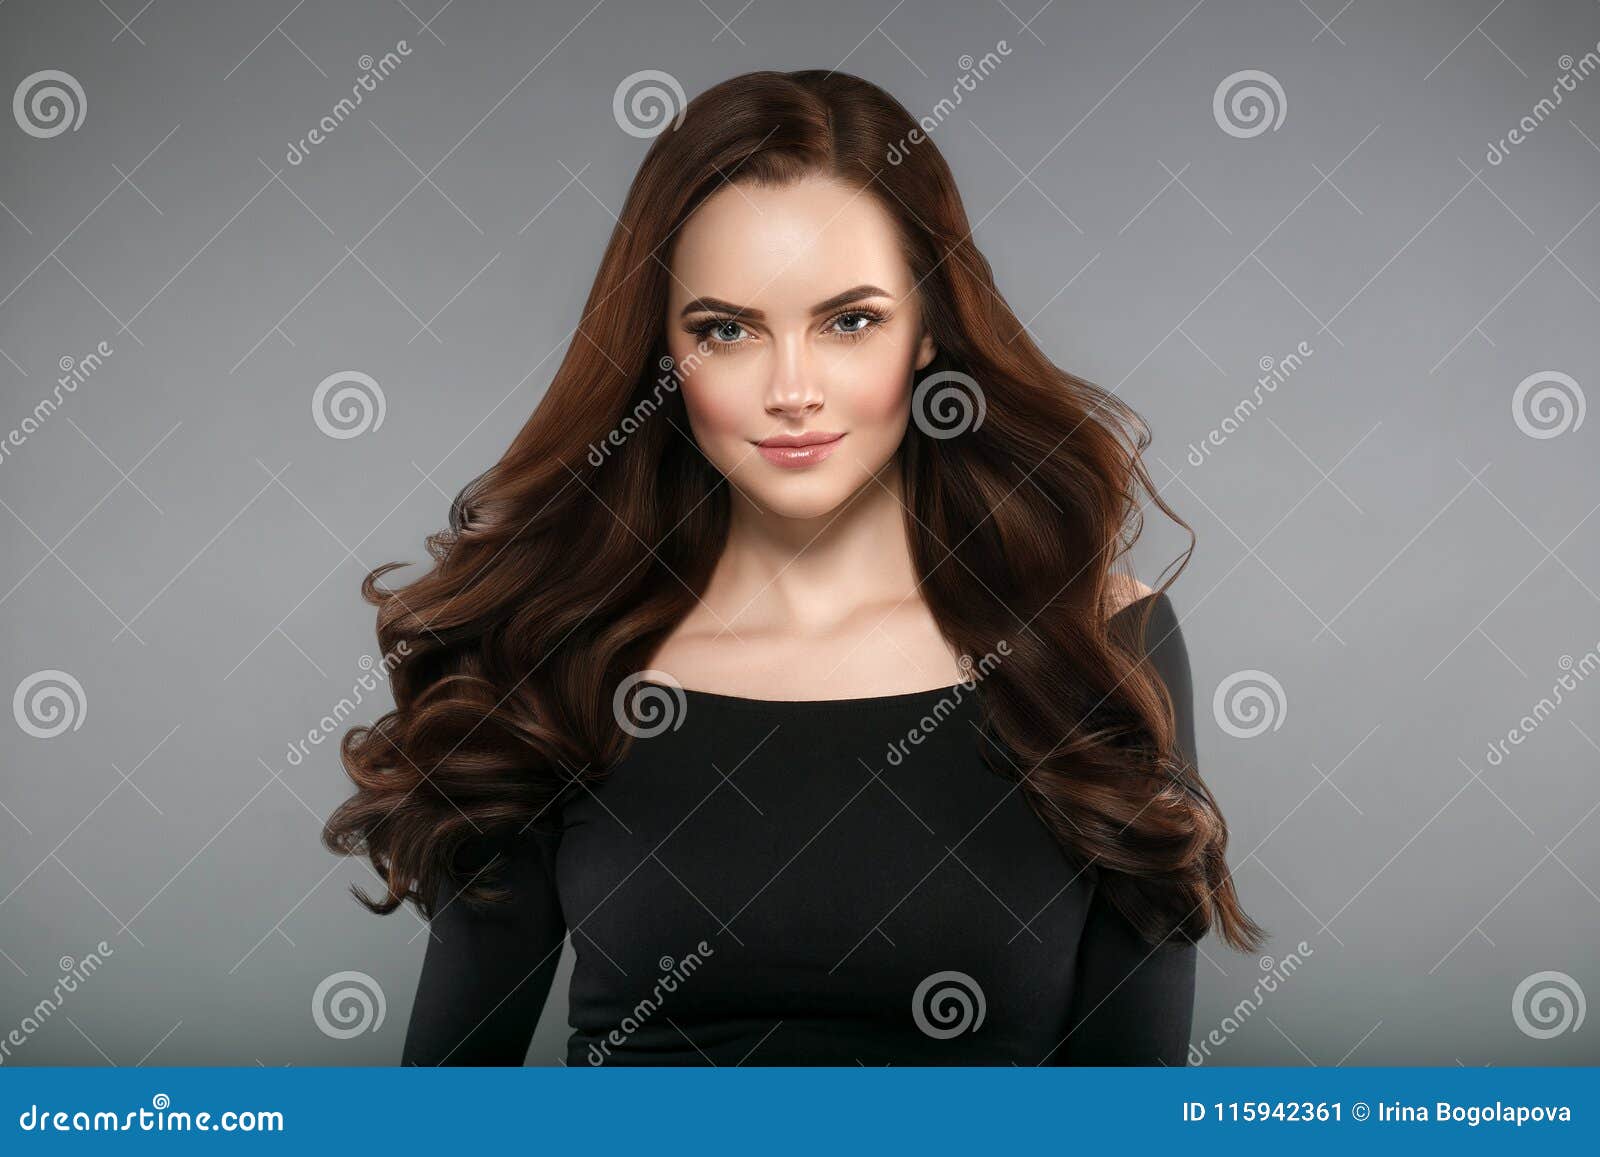 woman beauty healthy skin and hairstyle, brunette with long hair